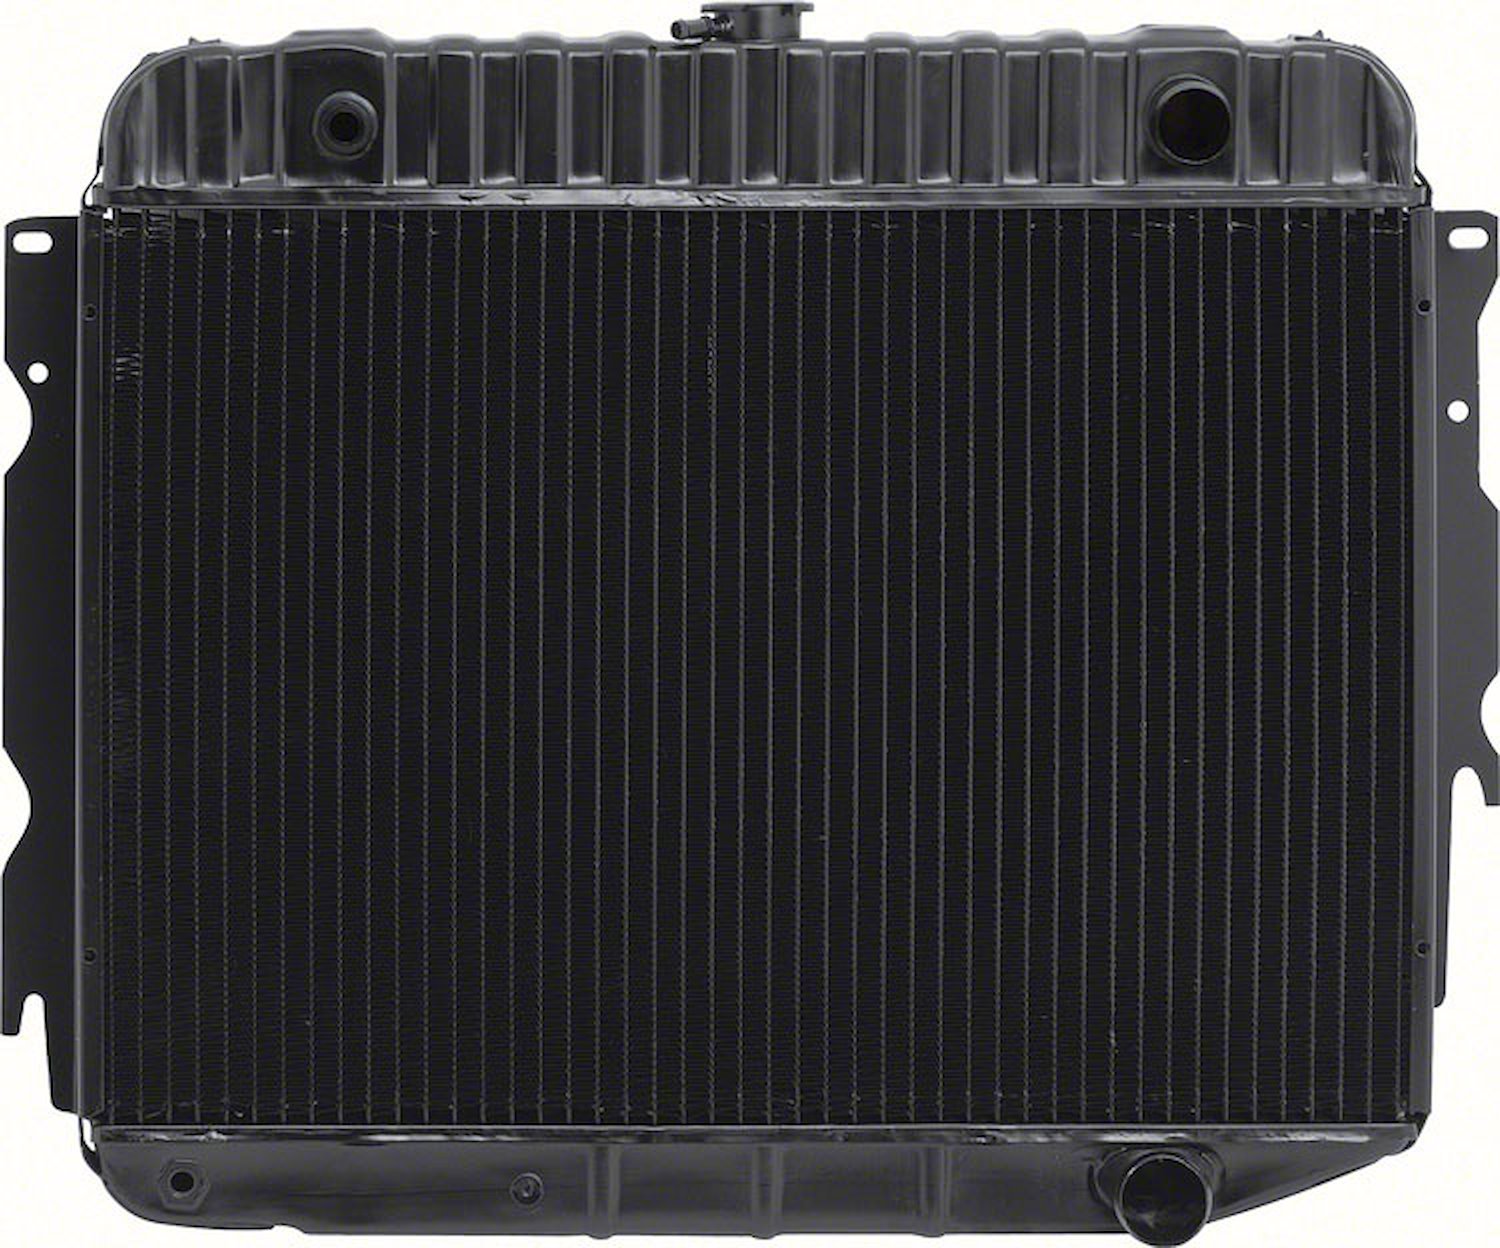 MD2301S Replacement Radiator 1973 Mopar B/E-Body Big Block V8 With Standard Trans 4 Row 22" Wide